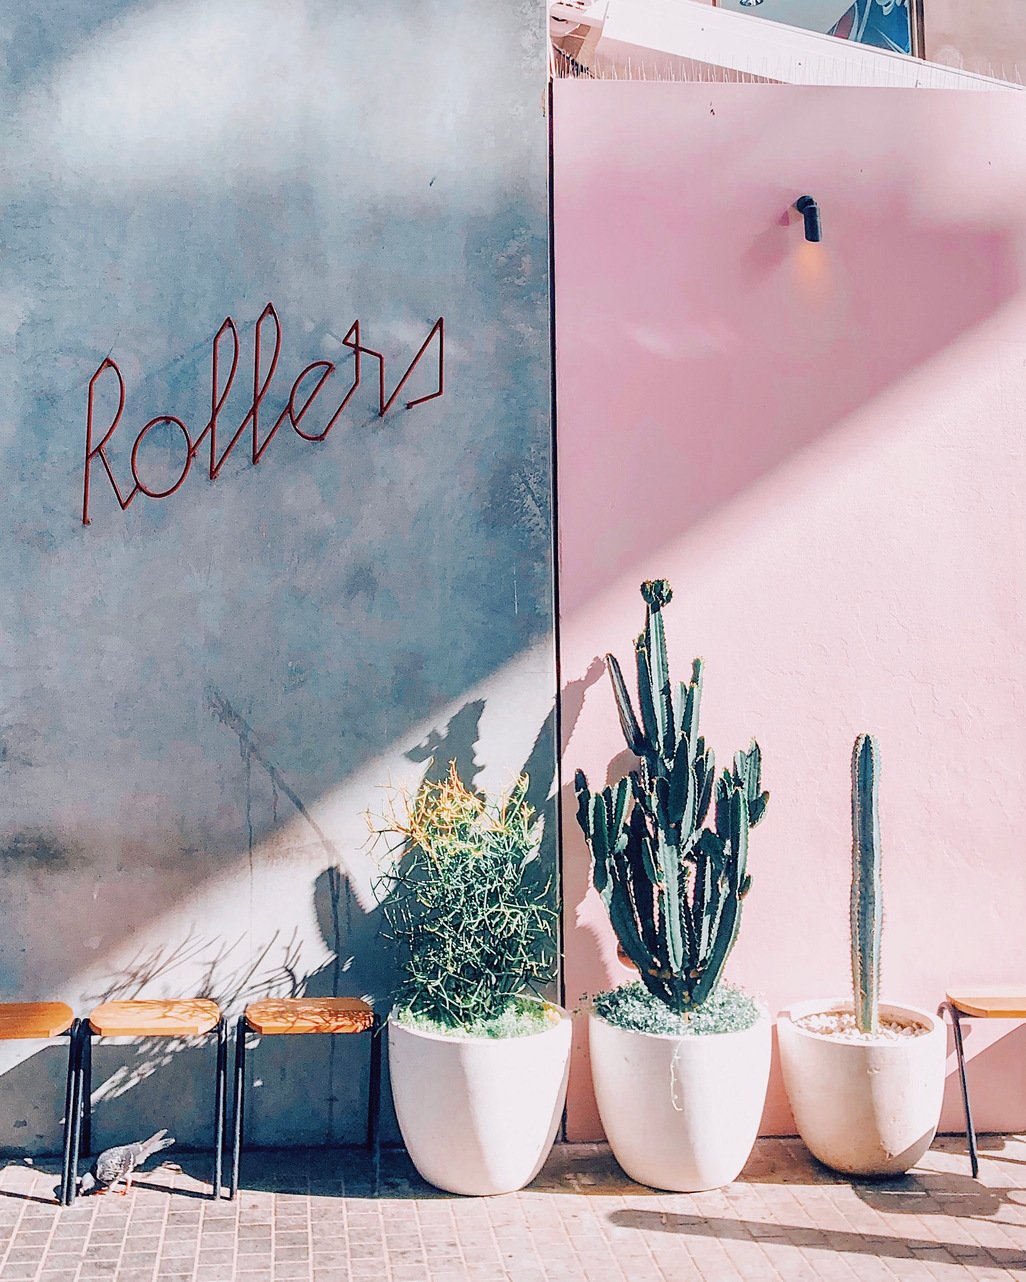 Rollers Bakehouse - Manly - Sydney - New South Wales (NSW) - Australia